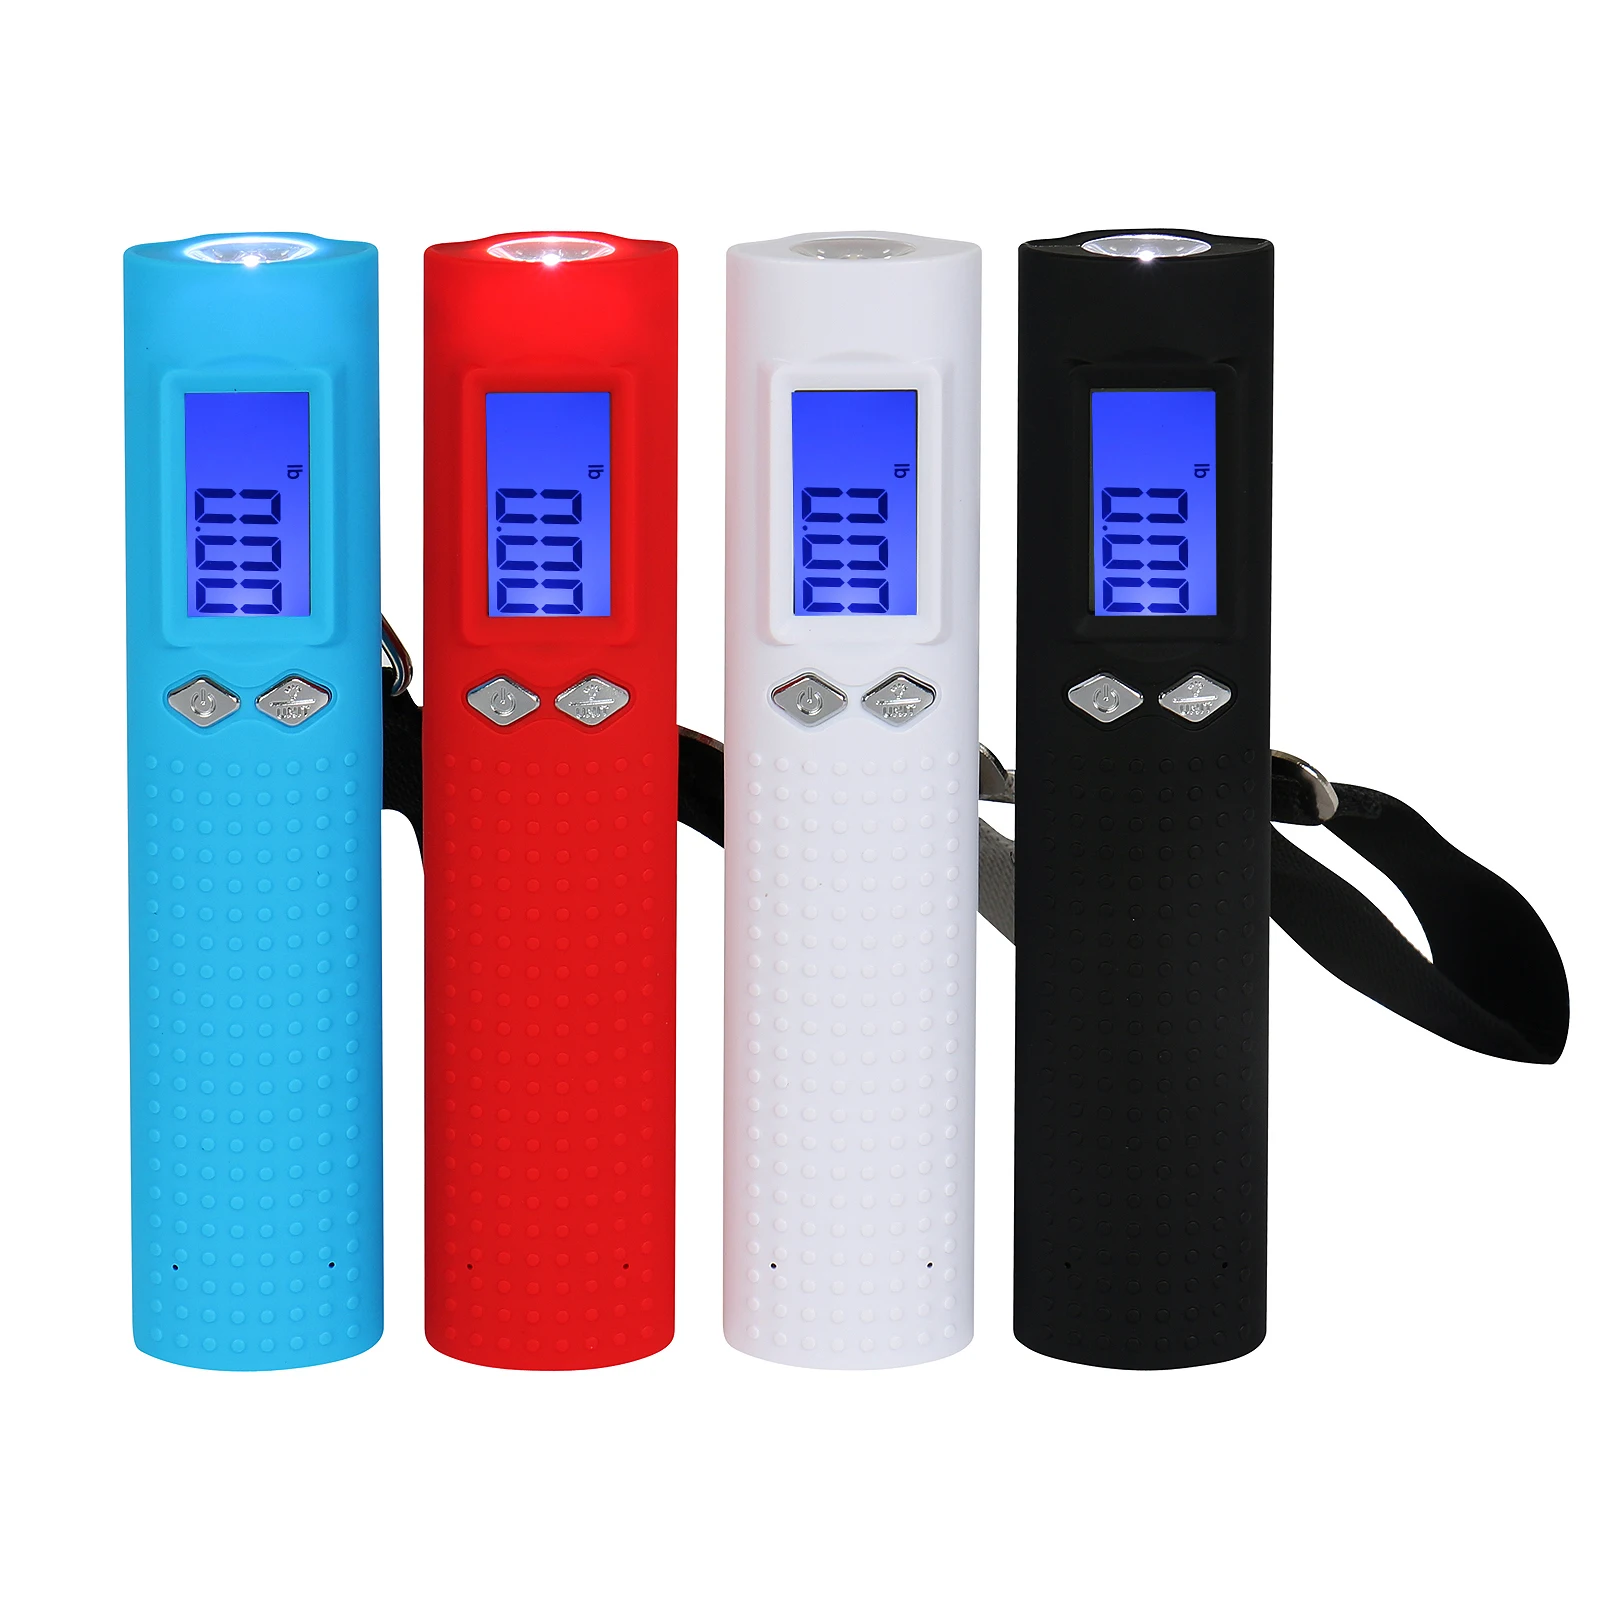 Digital USB Weighing Travel Luggage Scale With Charging LED Flashlight Function